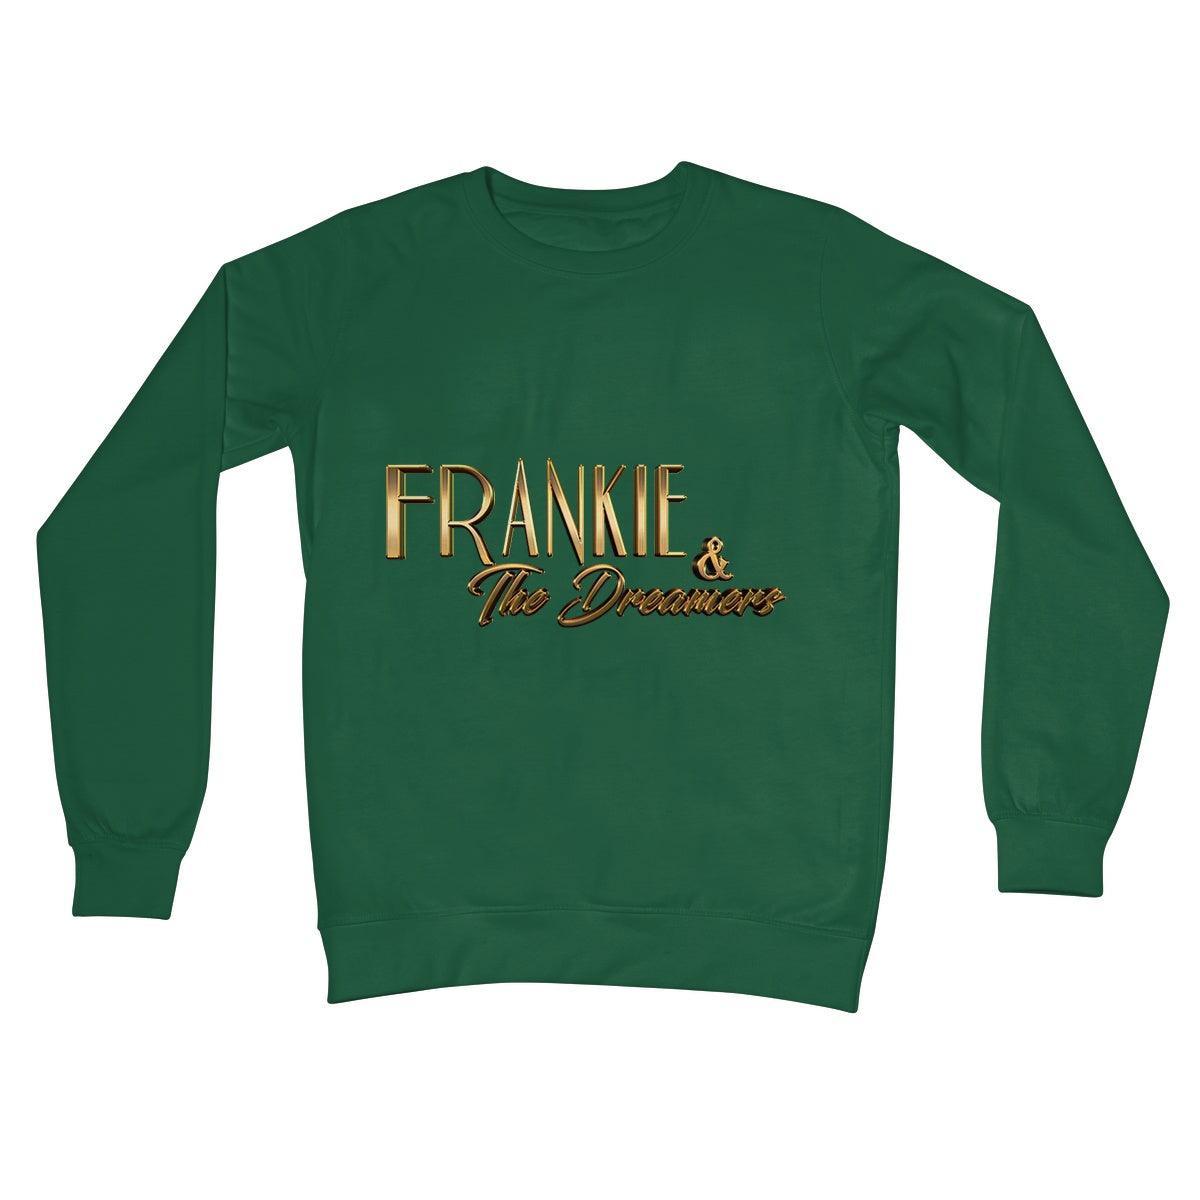 Frankie And The Dreamers Crew Neck Sweatshirt | Apparel Bottle Green